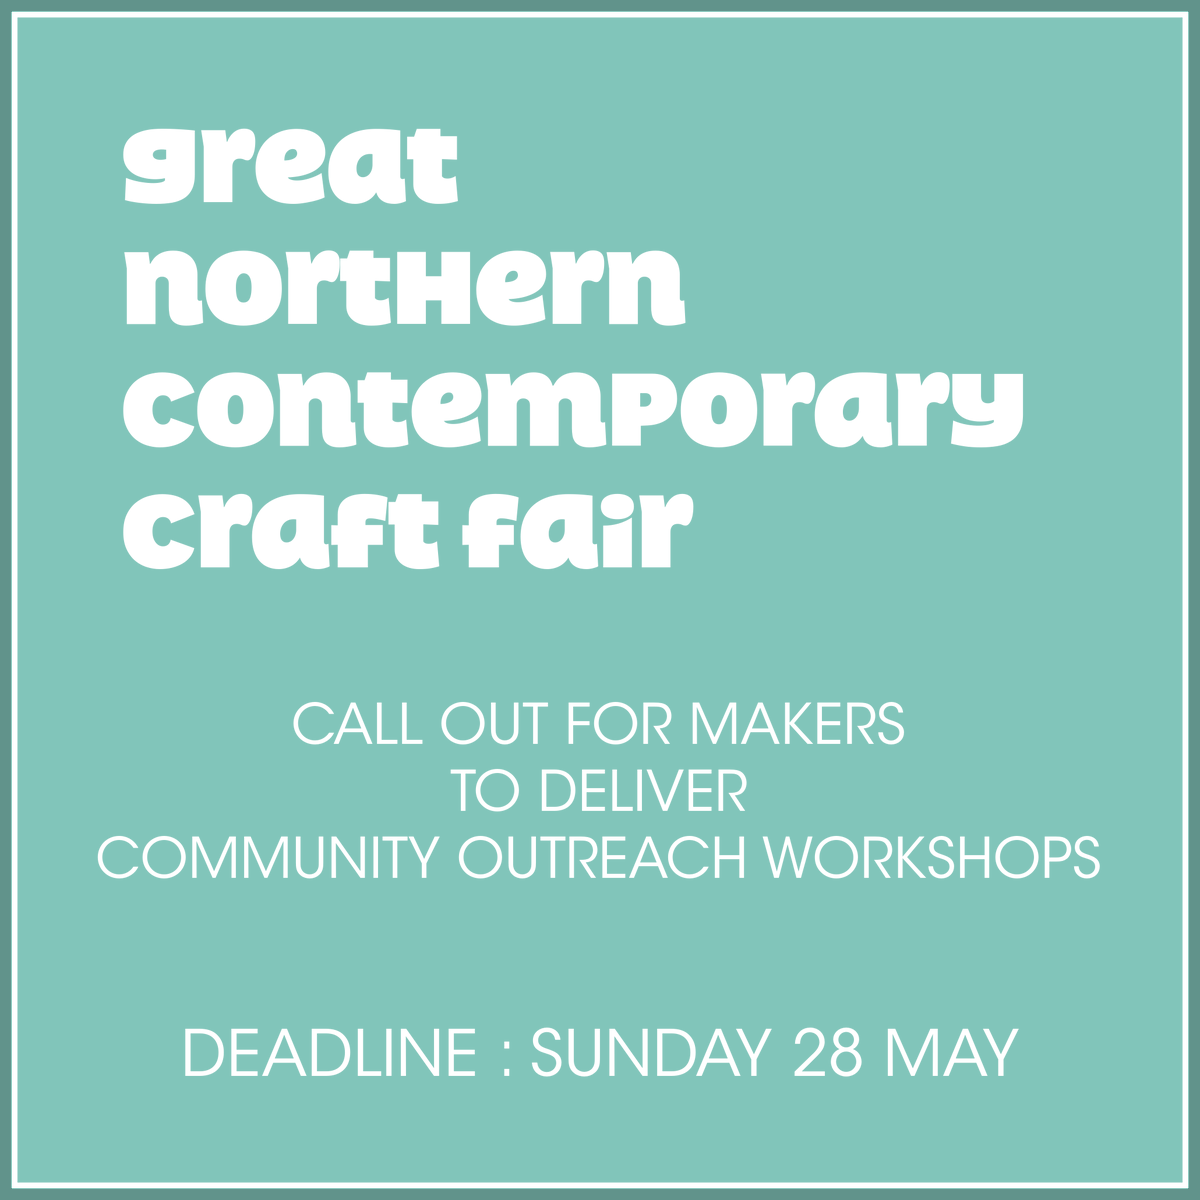 📣 CALL OUT FOR MAKERS TO DELIVER COMMUNITY OUTREACH WORKSHOPS.
-
➡️ If you are a confident maker with experience in running community craft projects, we would love to hear from you.
-
➡️ ALL INFO + APPLICATION HERE:-
tinyurl.com/GNCCFOutreach
‼️ DEADLINE : Midnight Sunday 28 May